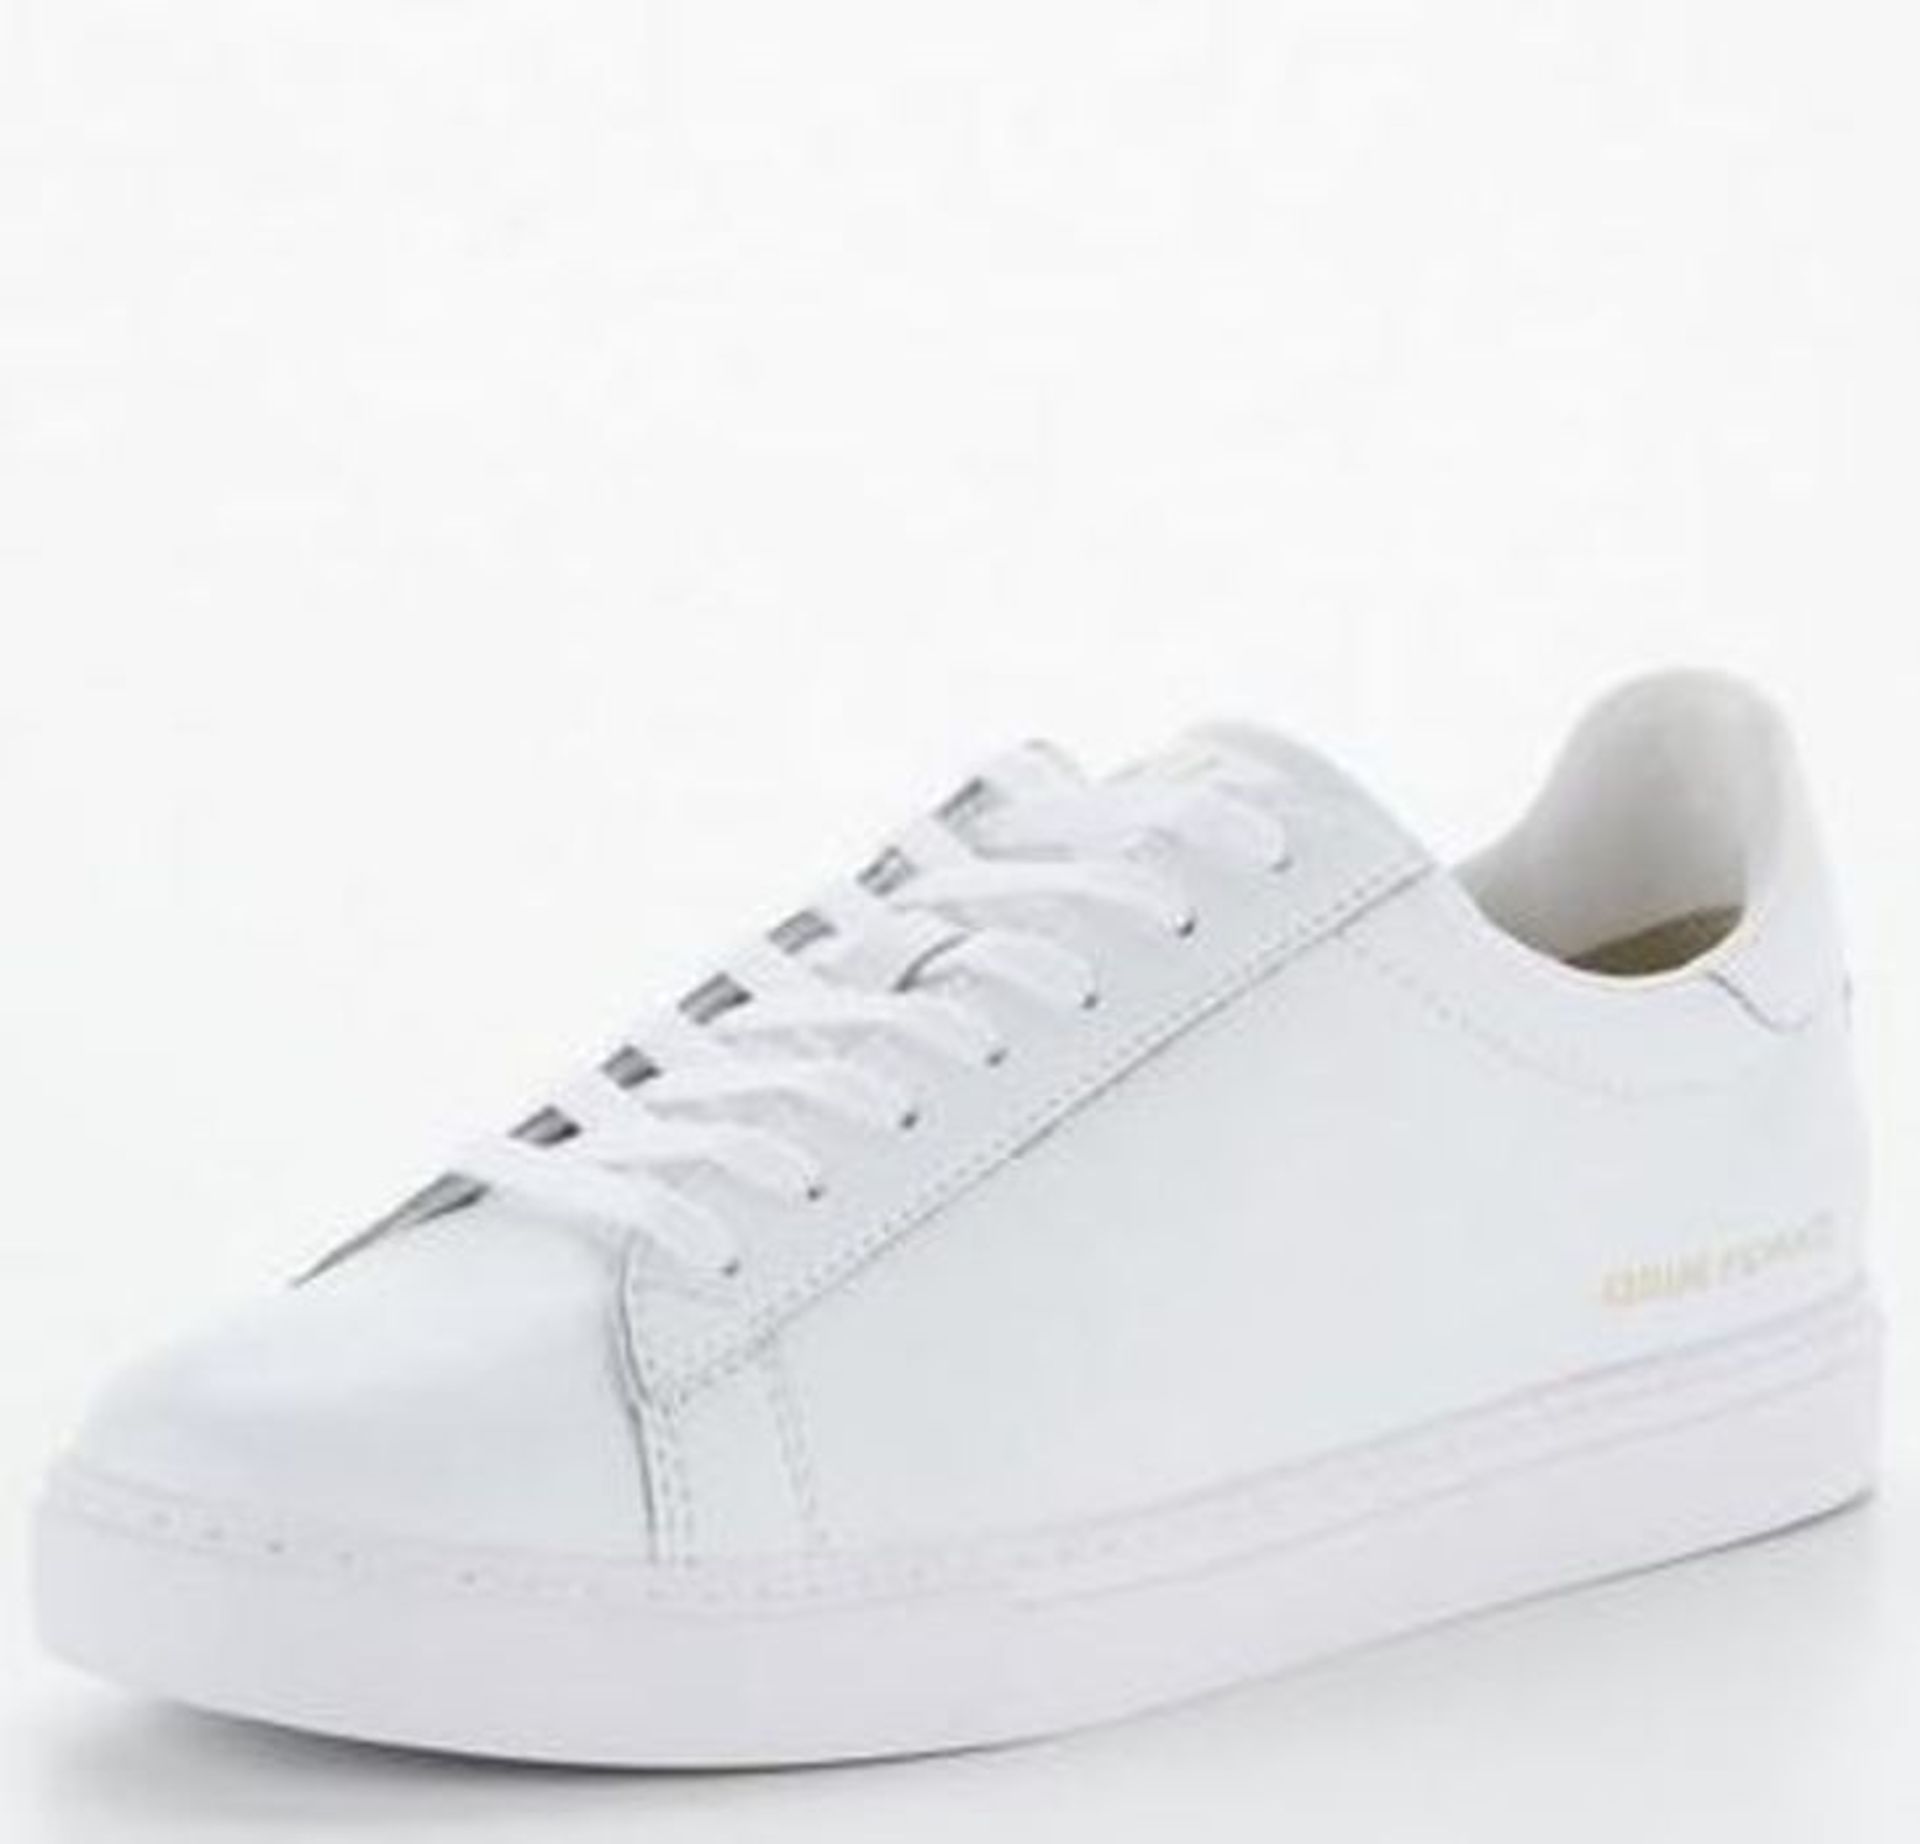 1 X PAIR OF ARMANI EXCHANGE LEATHER TRAINERS - WHITE / SIZE: 10 / RRP £155.00 / BRAND NEW WITH TAGS